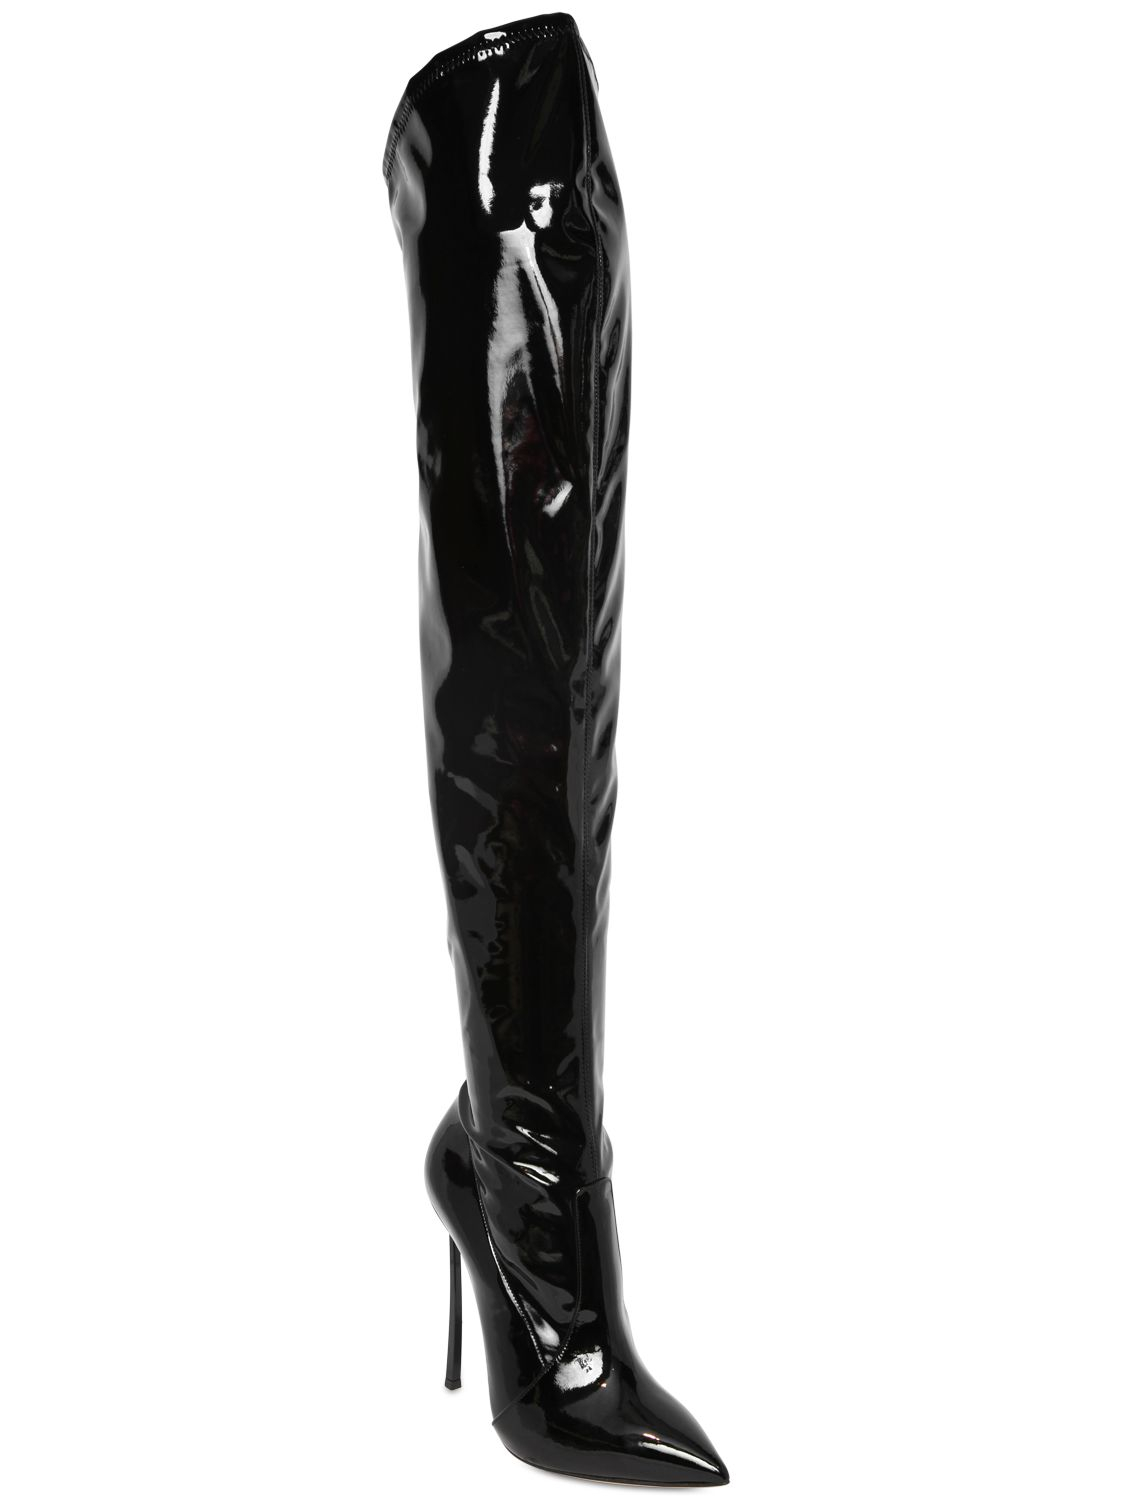 Casadei 115mm Naplak Patent Leather Boots in Black - Lyst